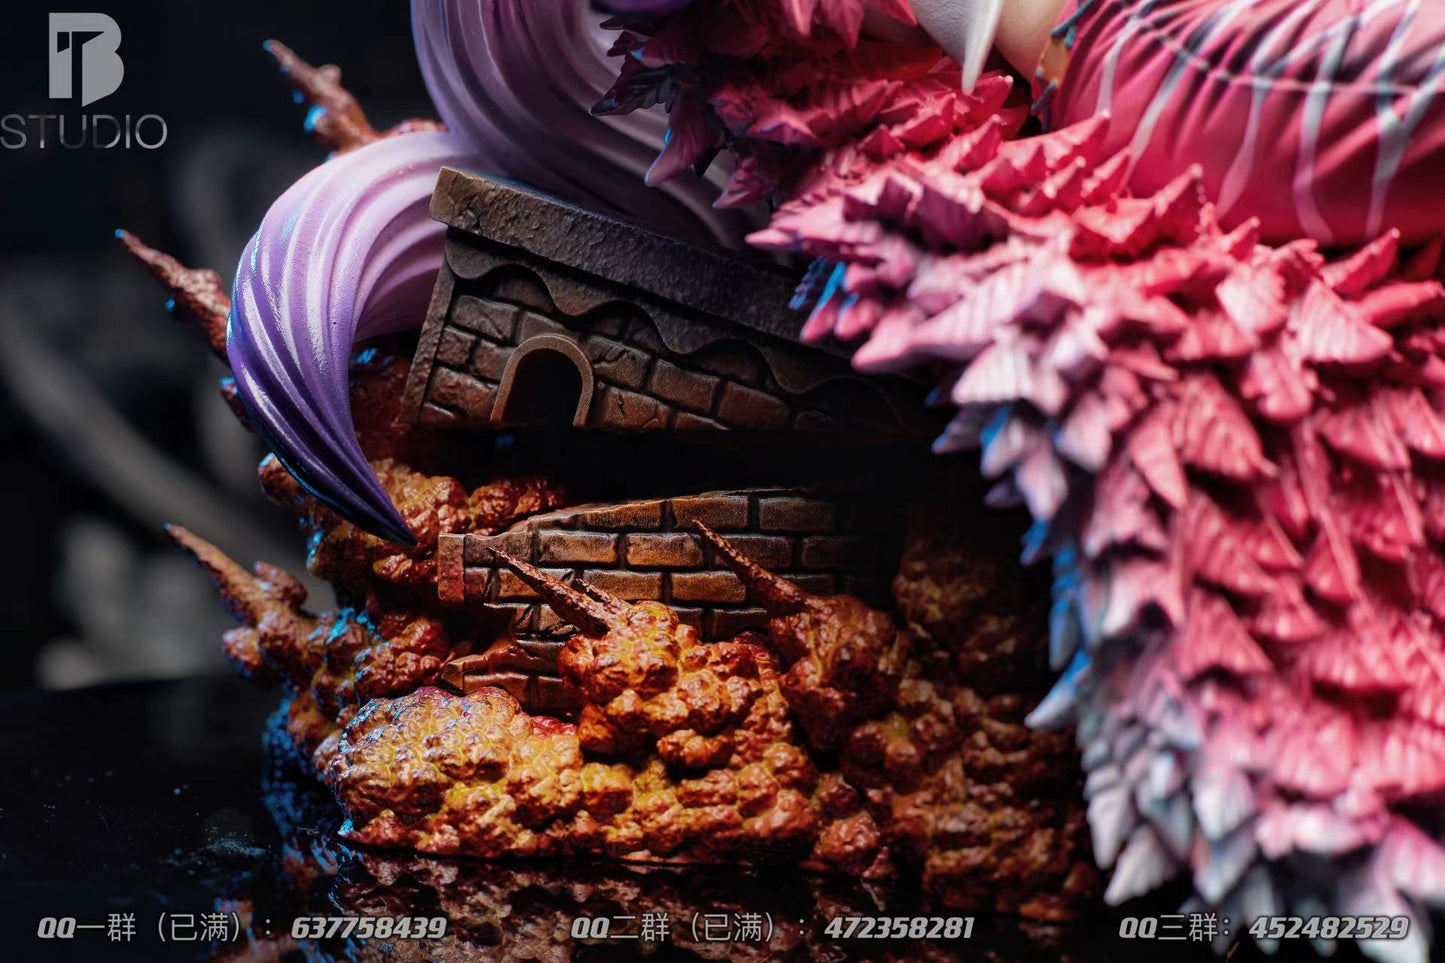 BT STUDIO – ONE PIECE: 7 WARLORDS SITTING POSE SERIES 6. DOFLAMINGO [SOLD OUT]